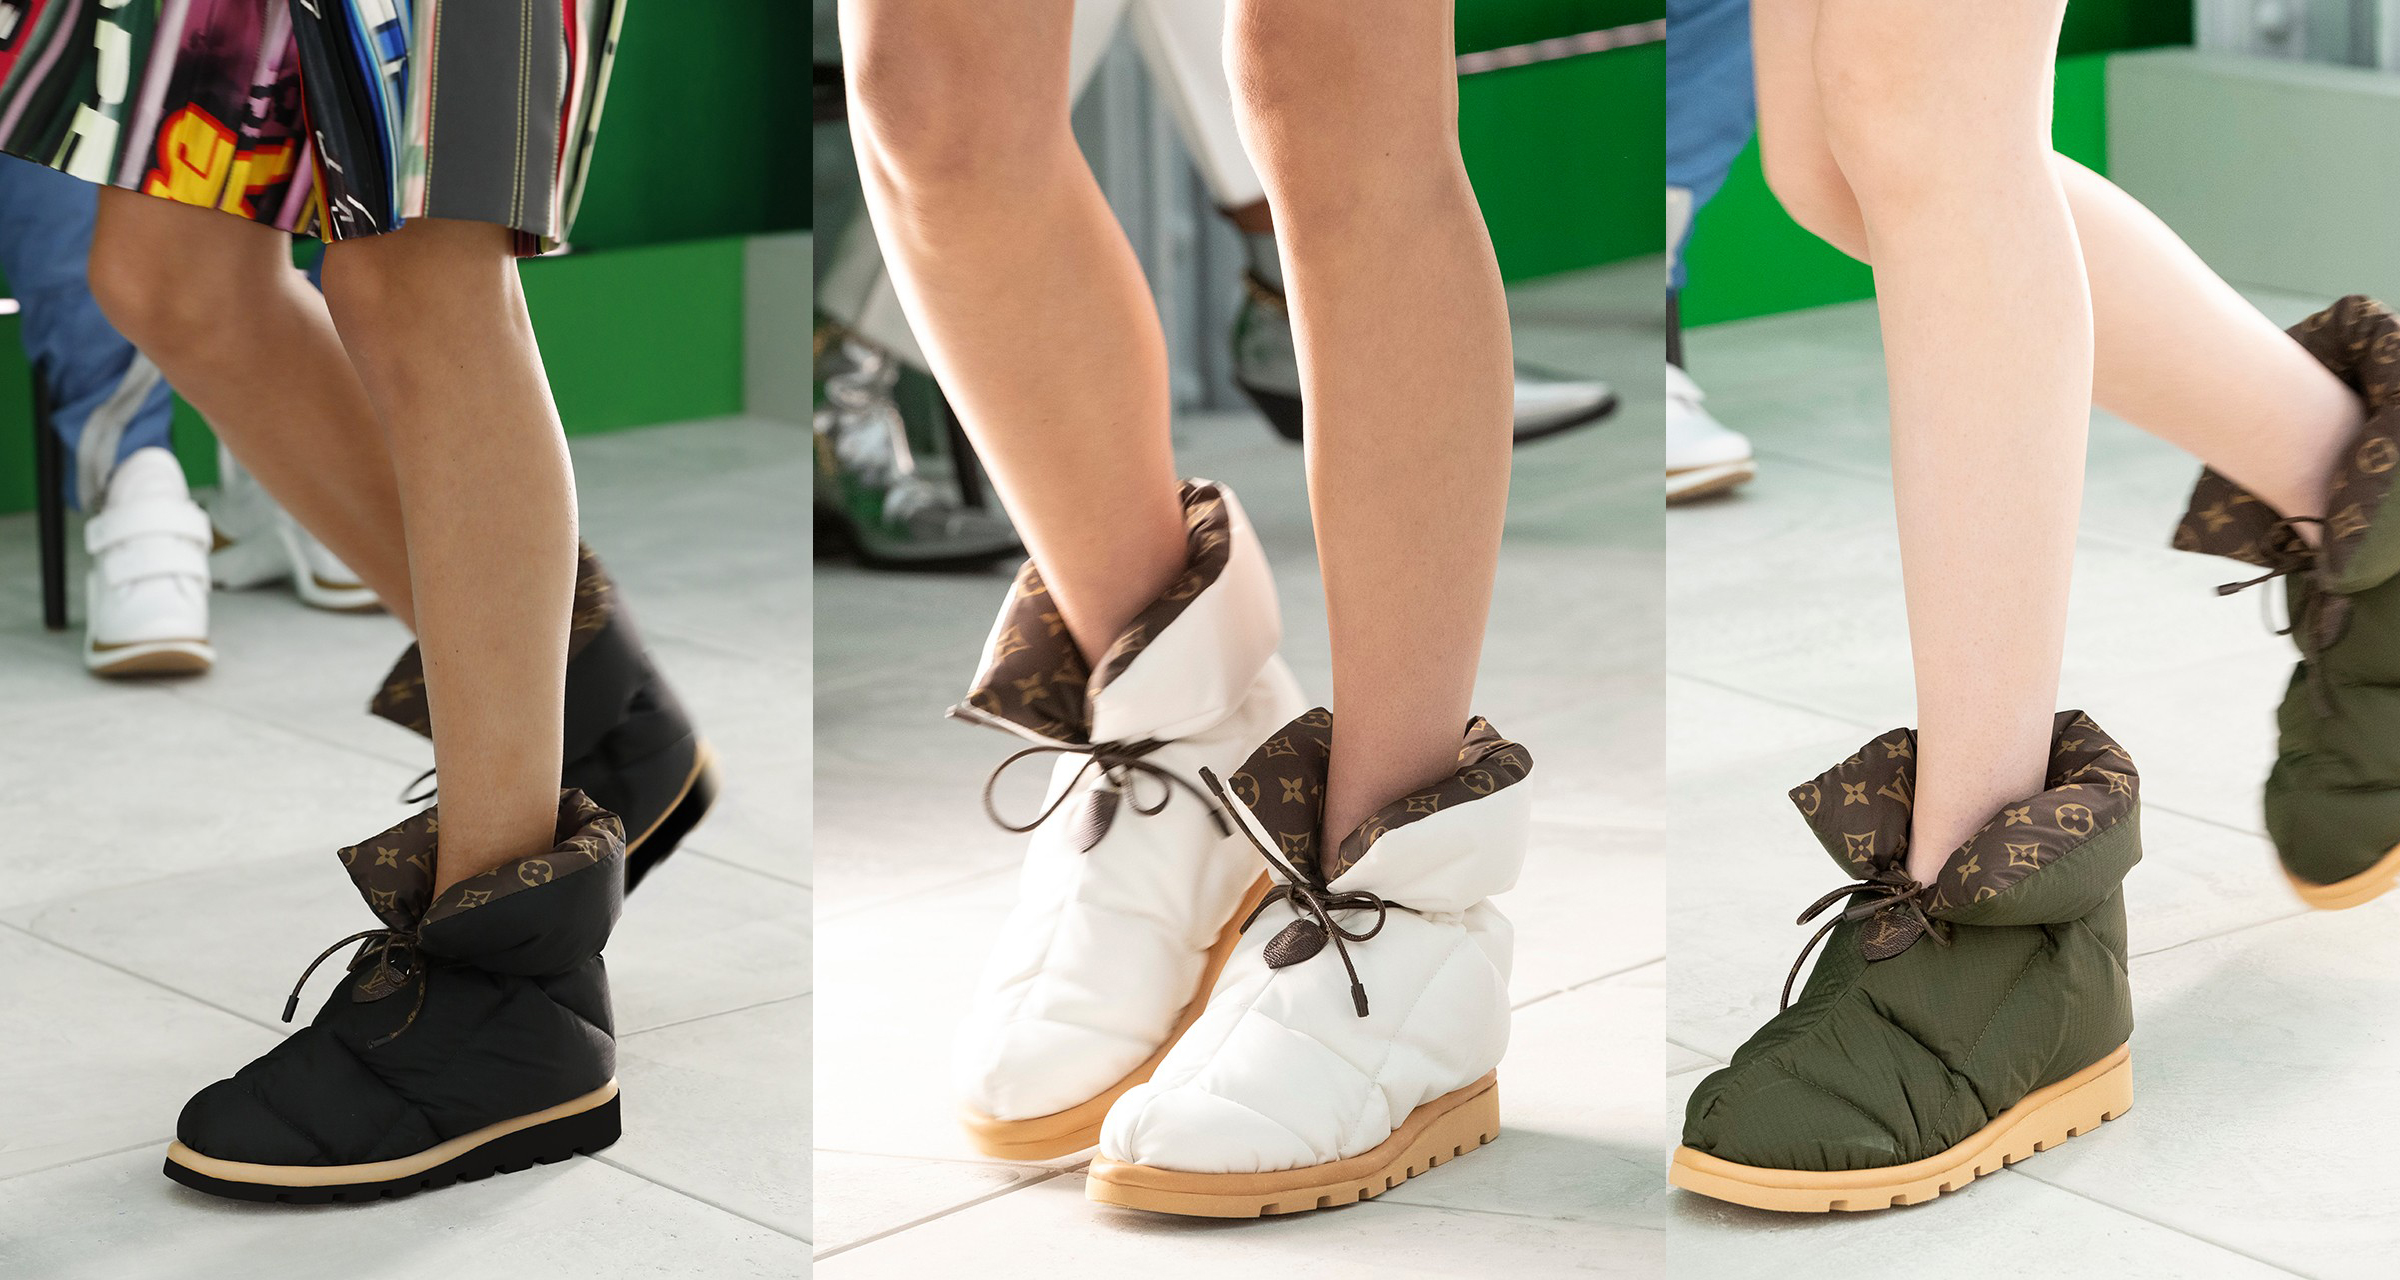 Louis Vuitton Pillow Boots Are The Puffer Shoes All Over Instagram   Glamour UK